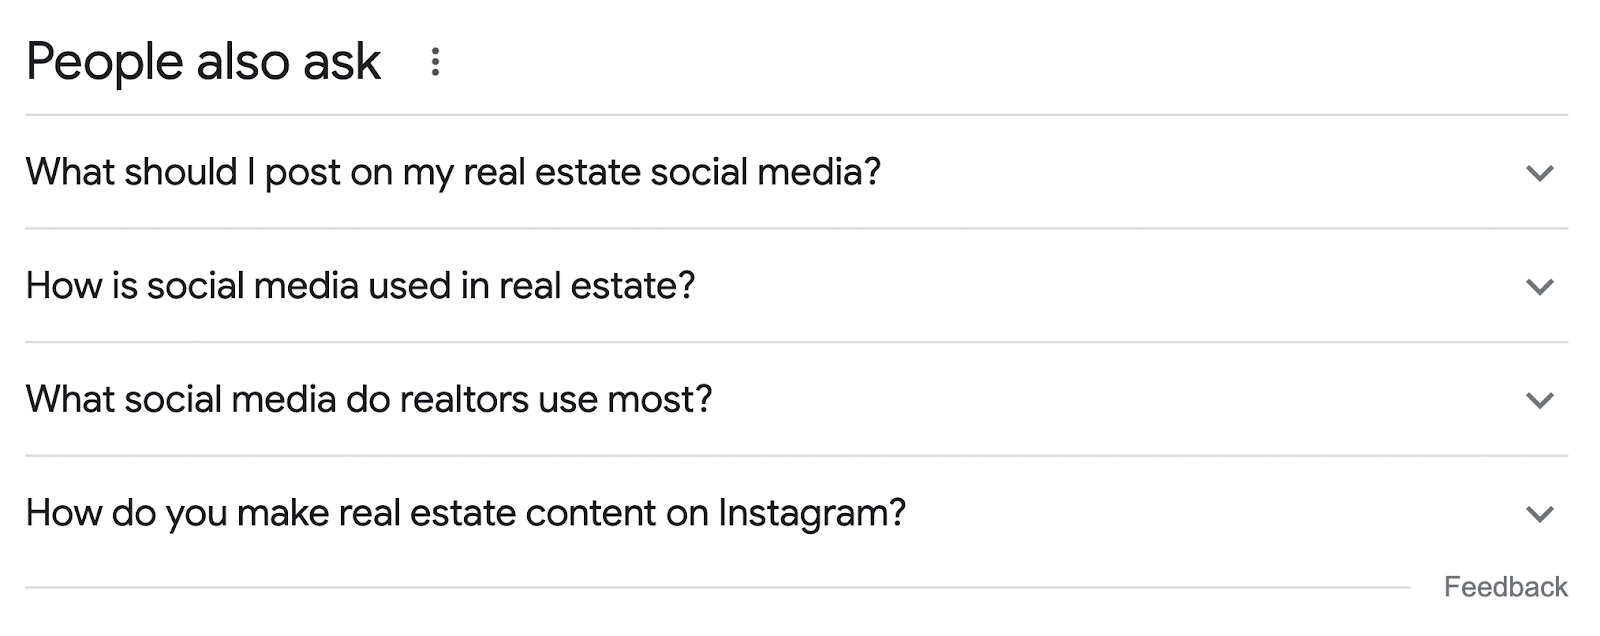 “People also ask” section for "real estate social media content” on Google